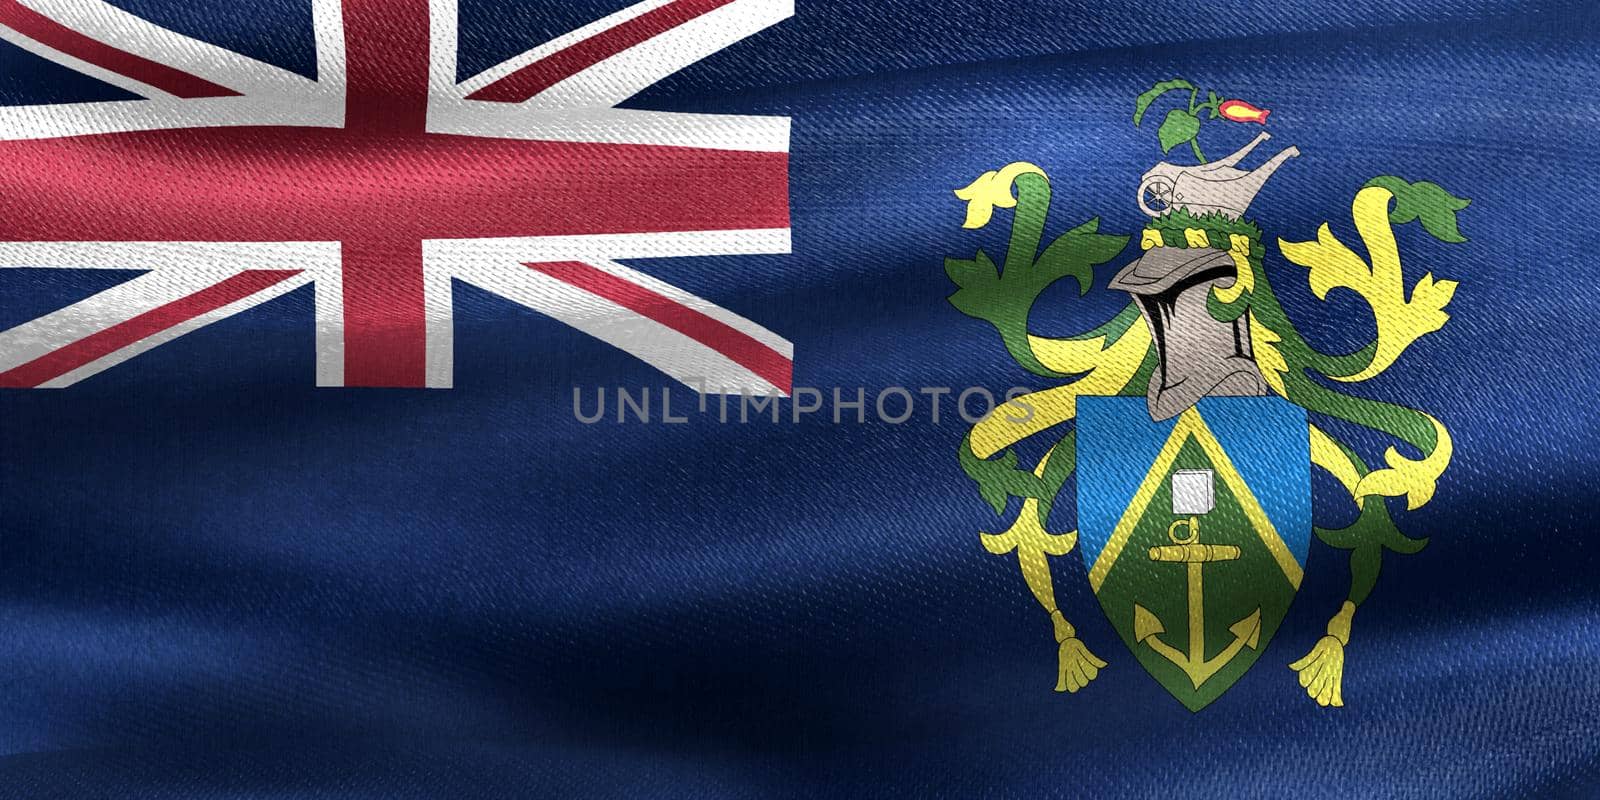 3D-Illustration of a Pitcairn Islands flag - realistic waving fabric flag by MP_foto71